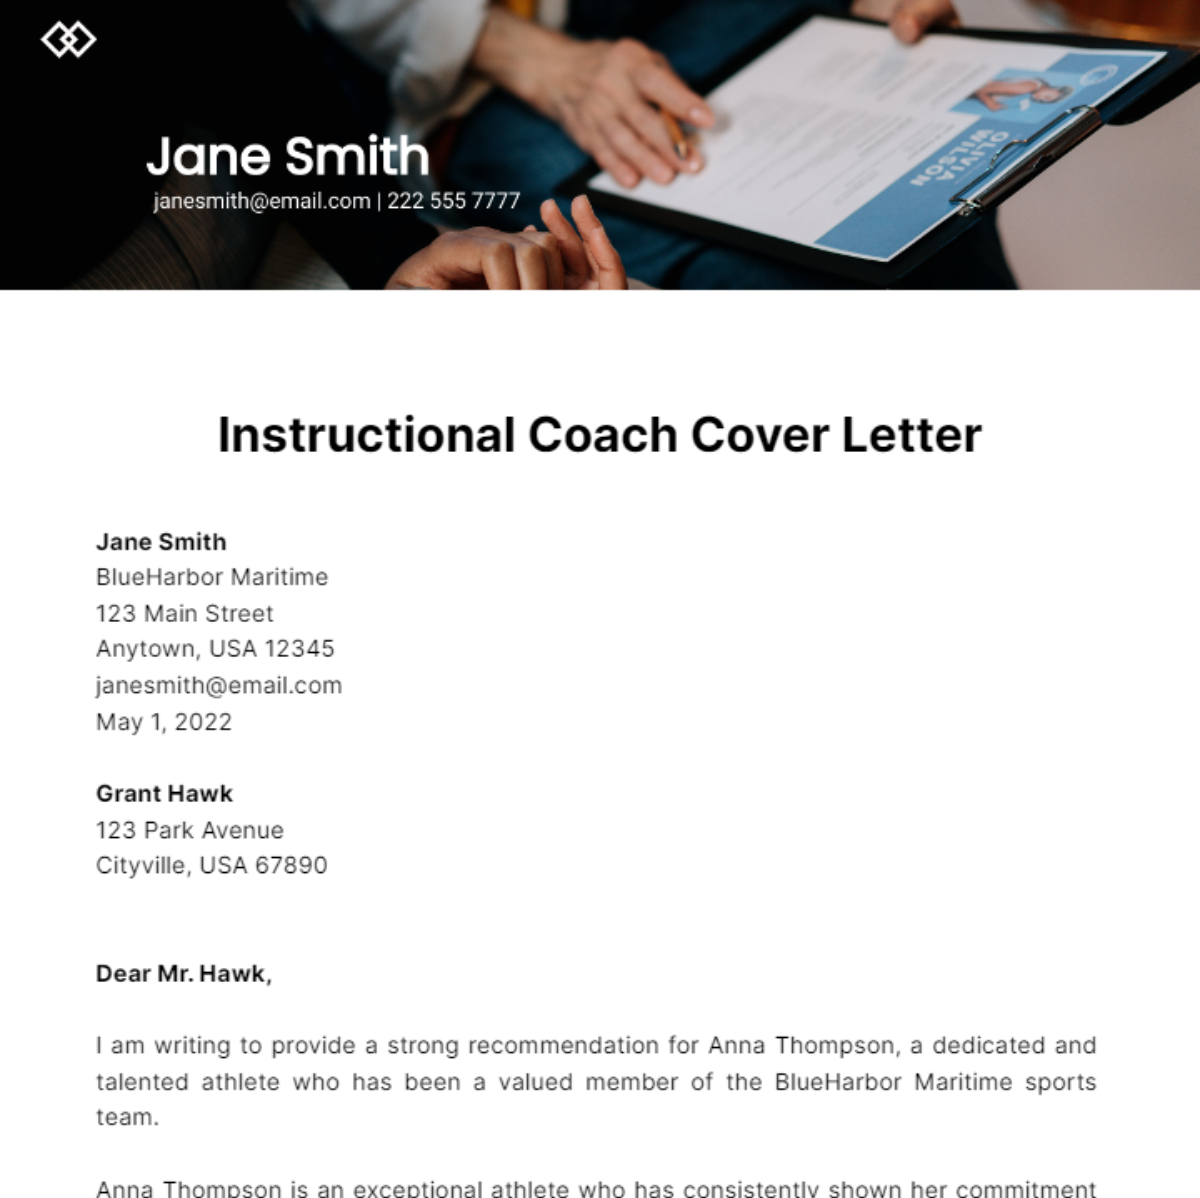 Instructional Coach Cover Letter Template